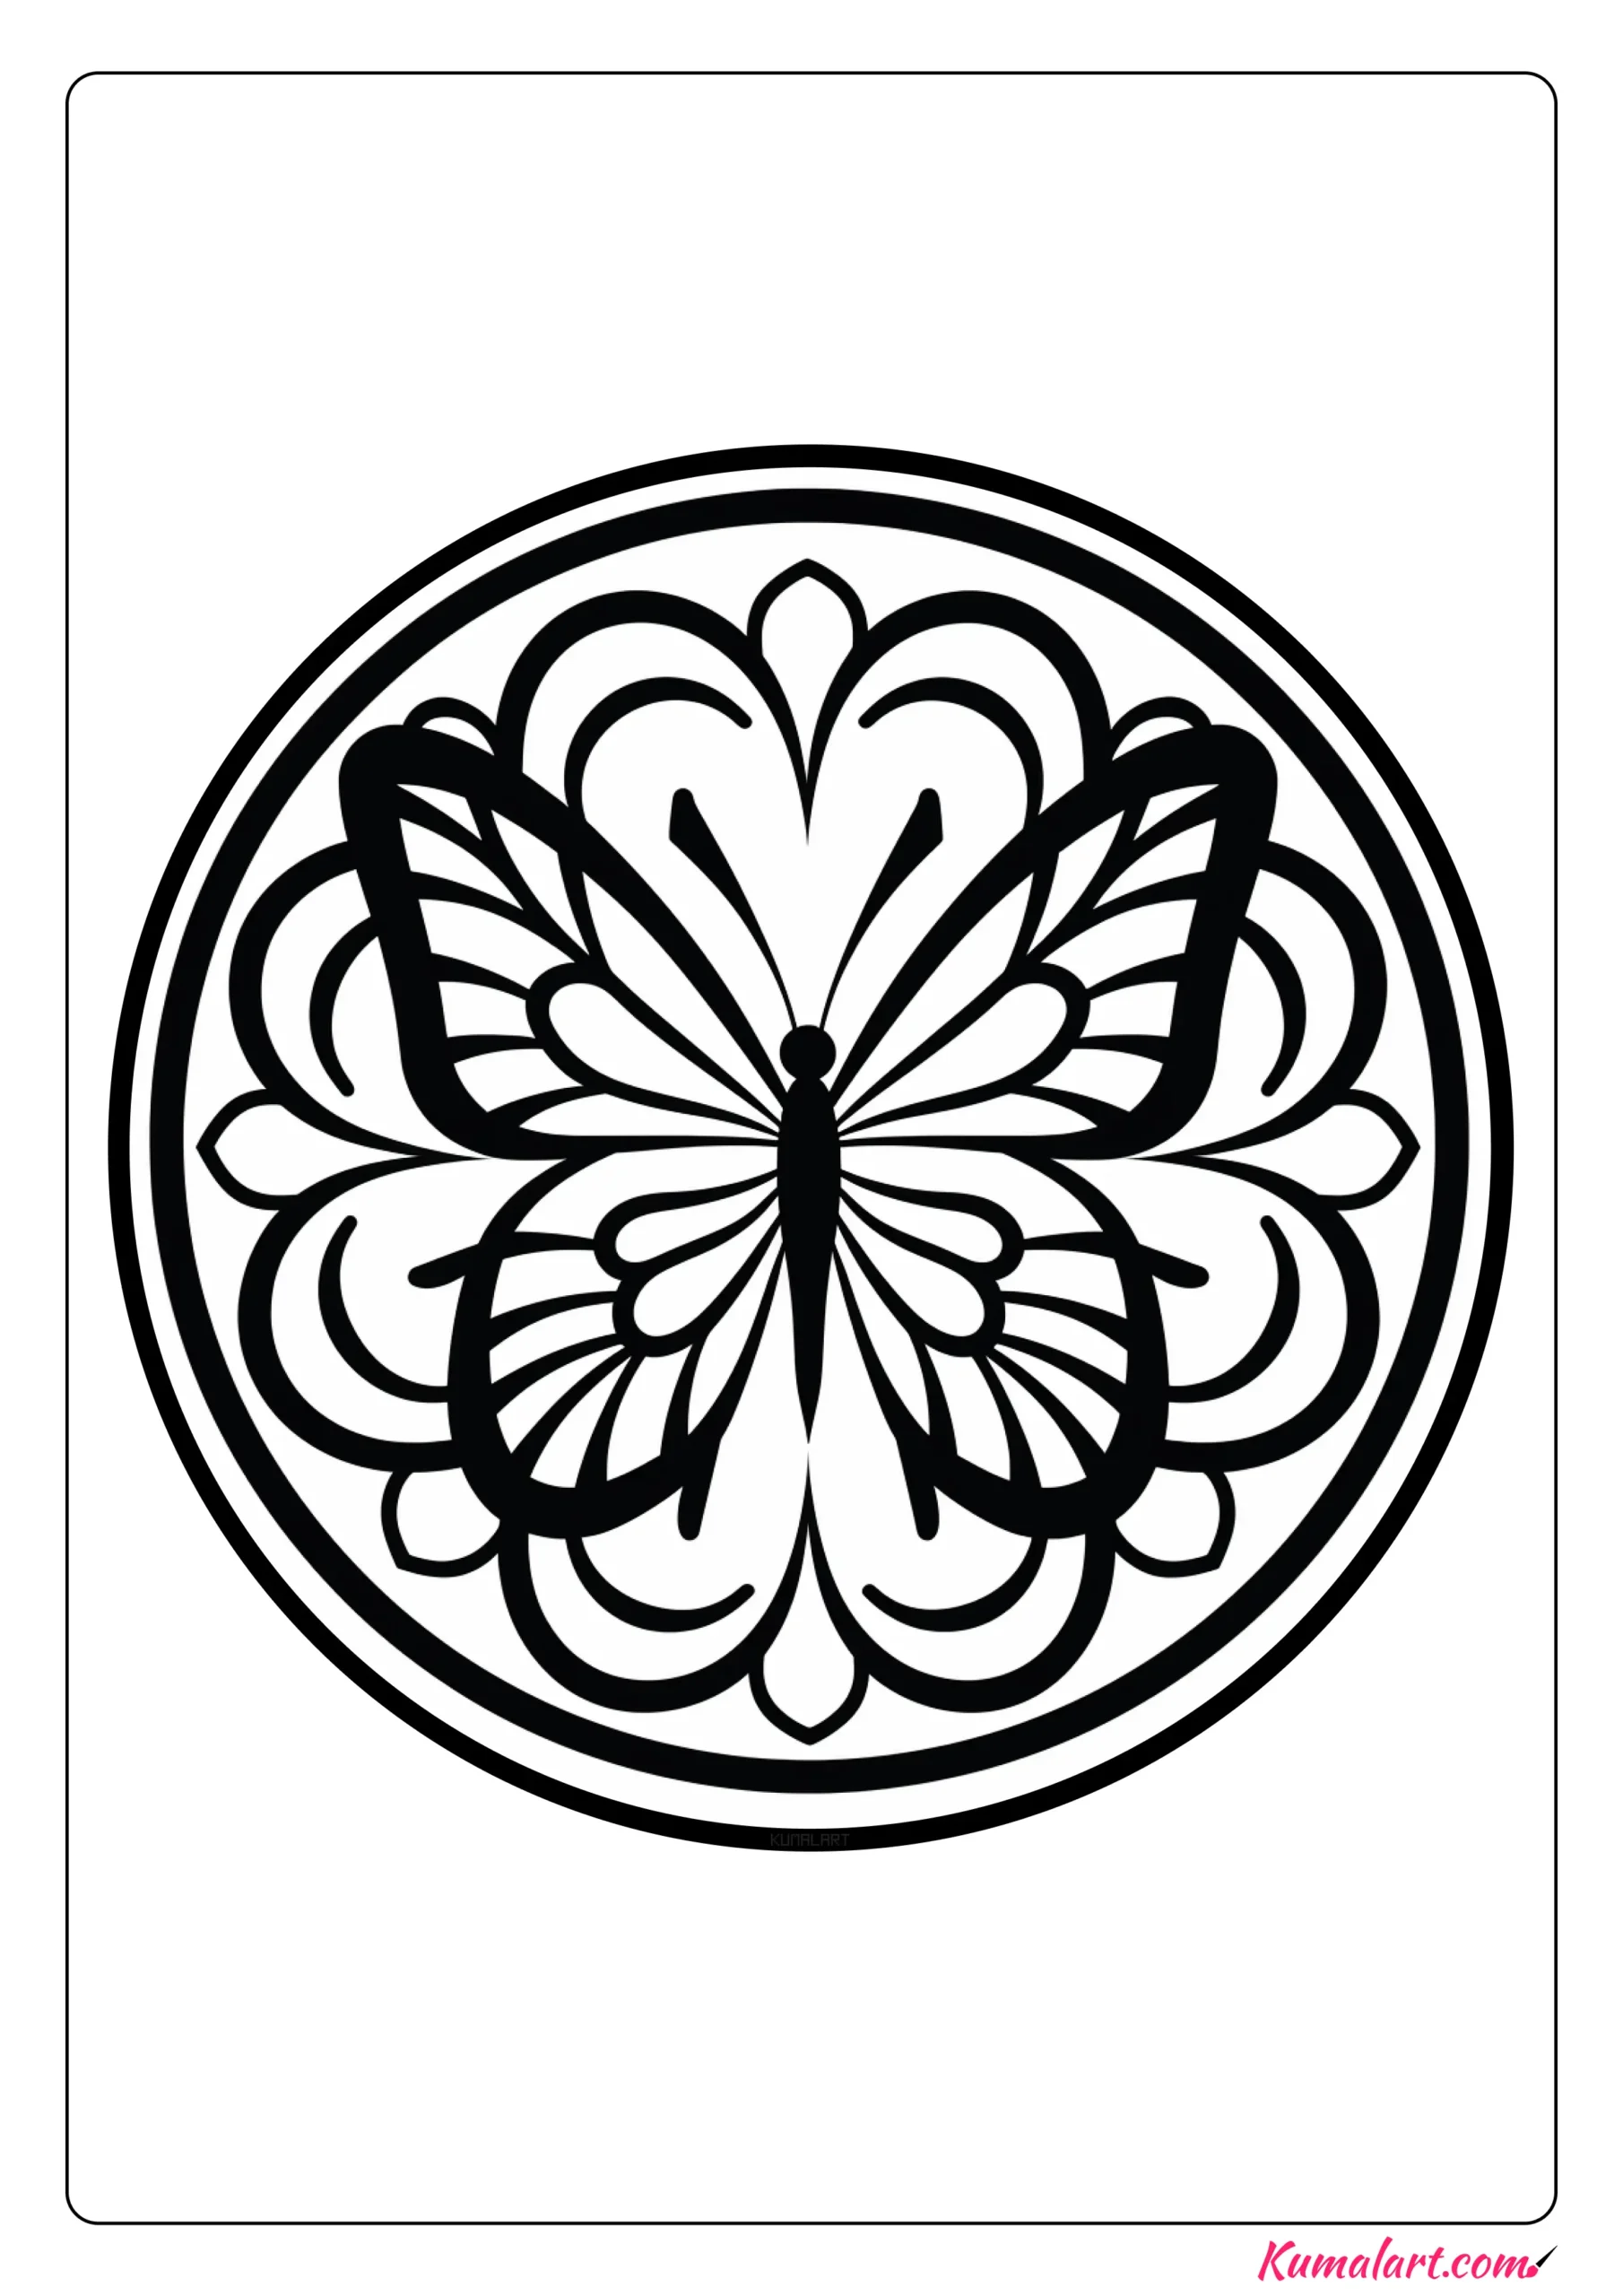 Rocky the Butterfly Mandala Coloring Page